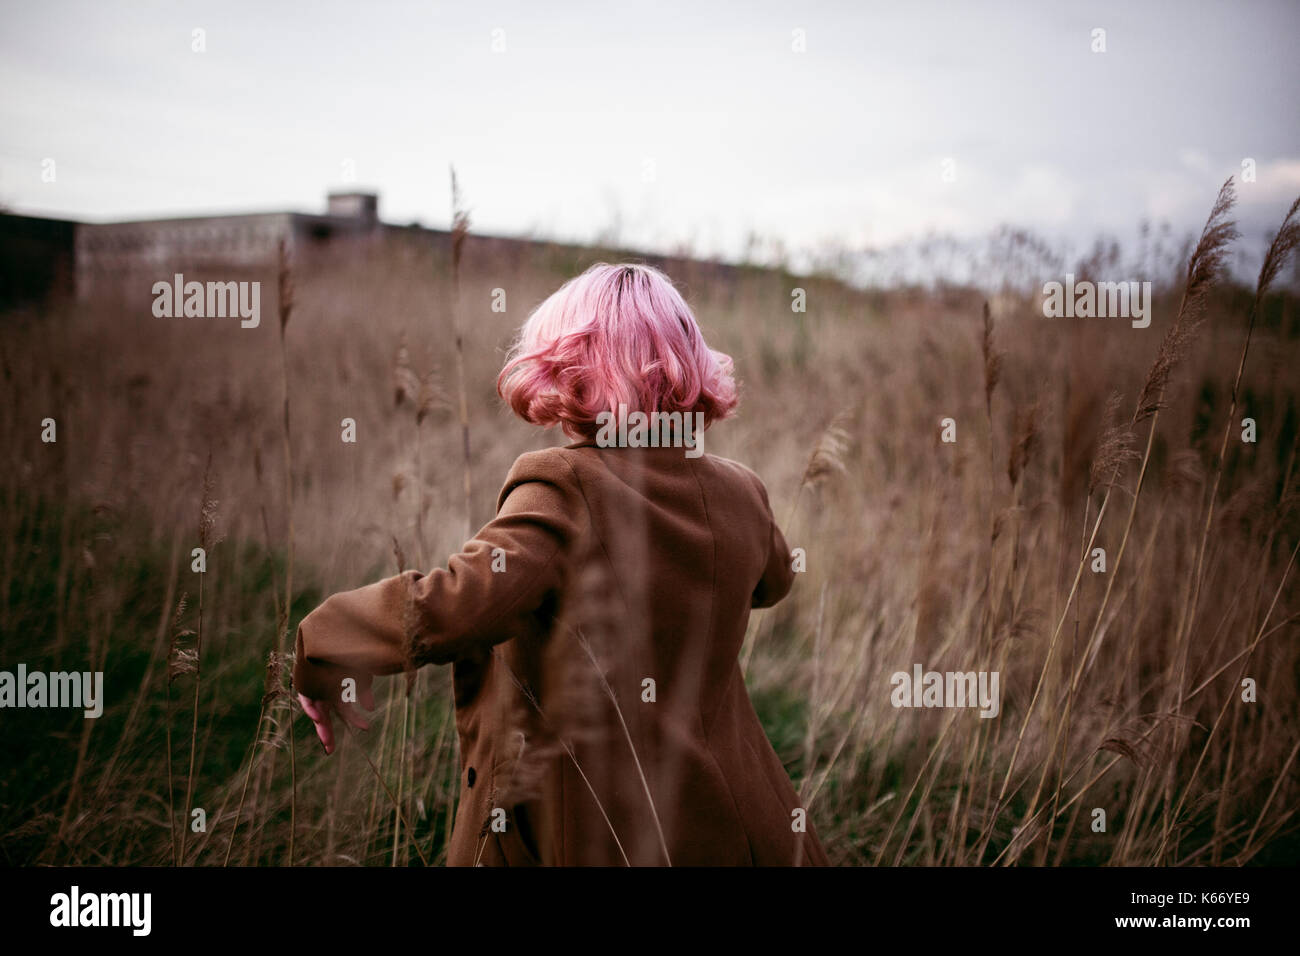 Caucasian woman with pink hair running in field Stock Photo